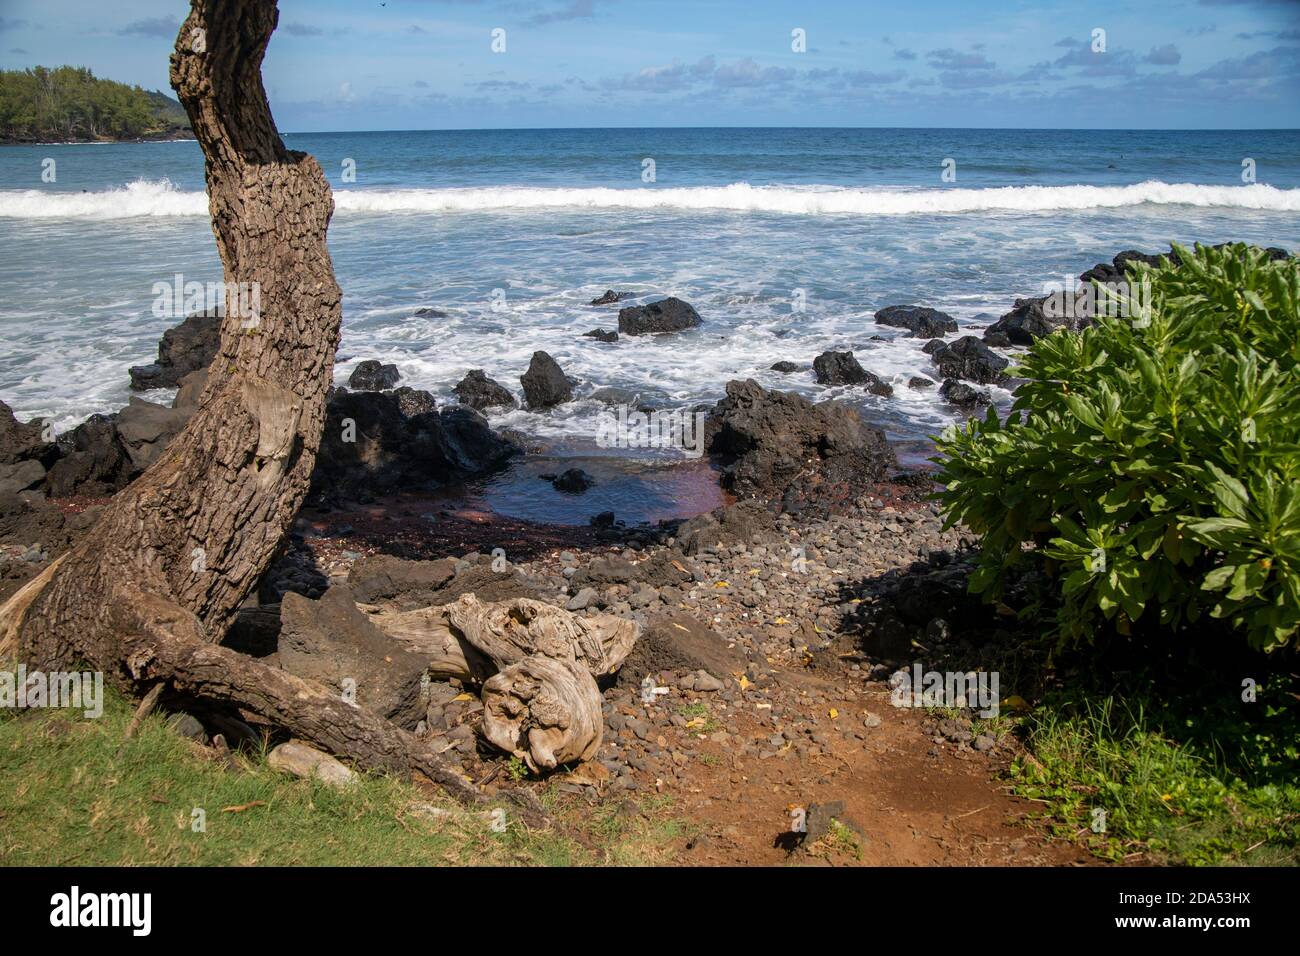 Hawaii Beach during the Day Stock Photo